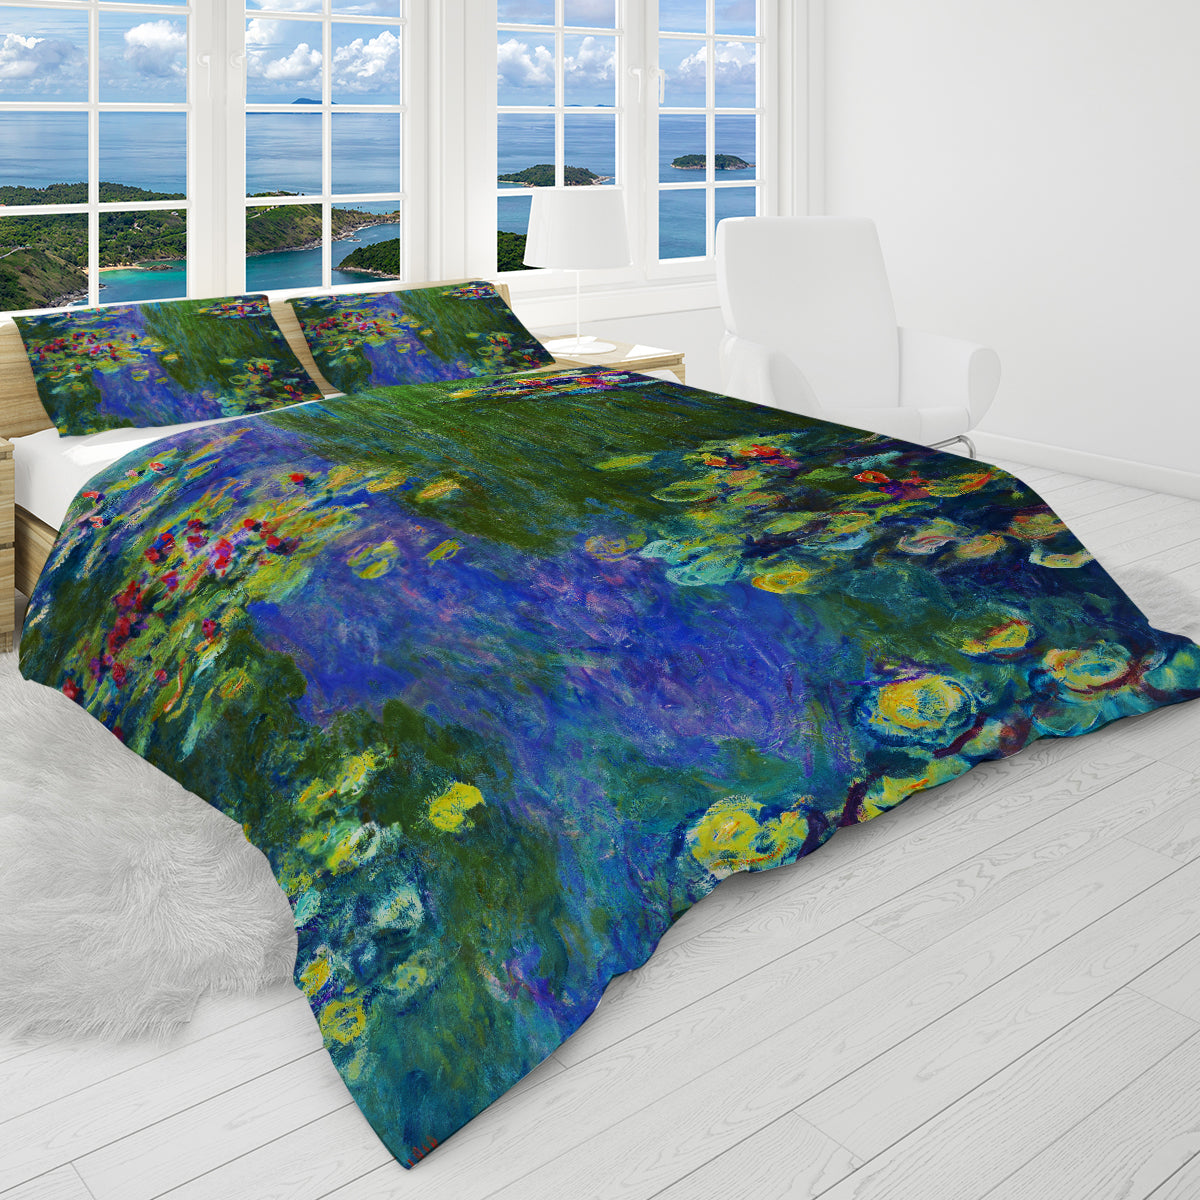 Claude Monet's Water Lilies Double Sided Bedcover Set